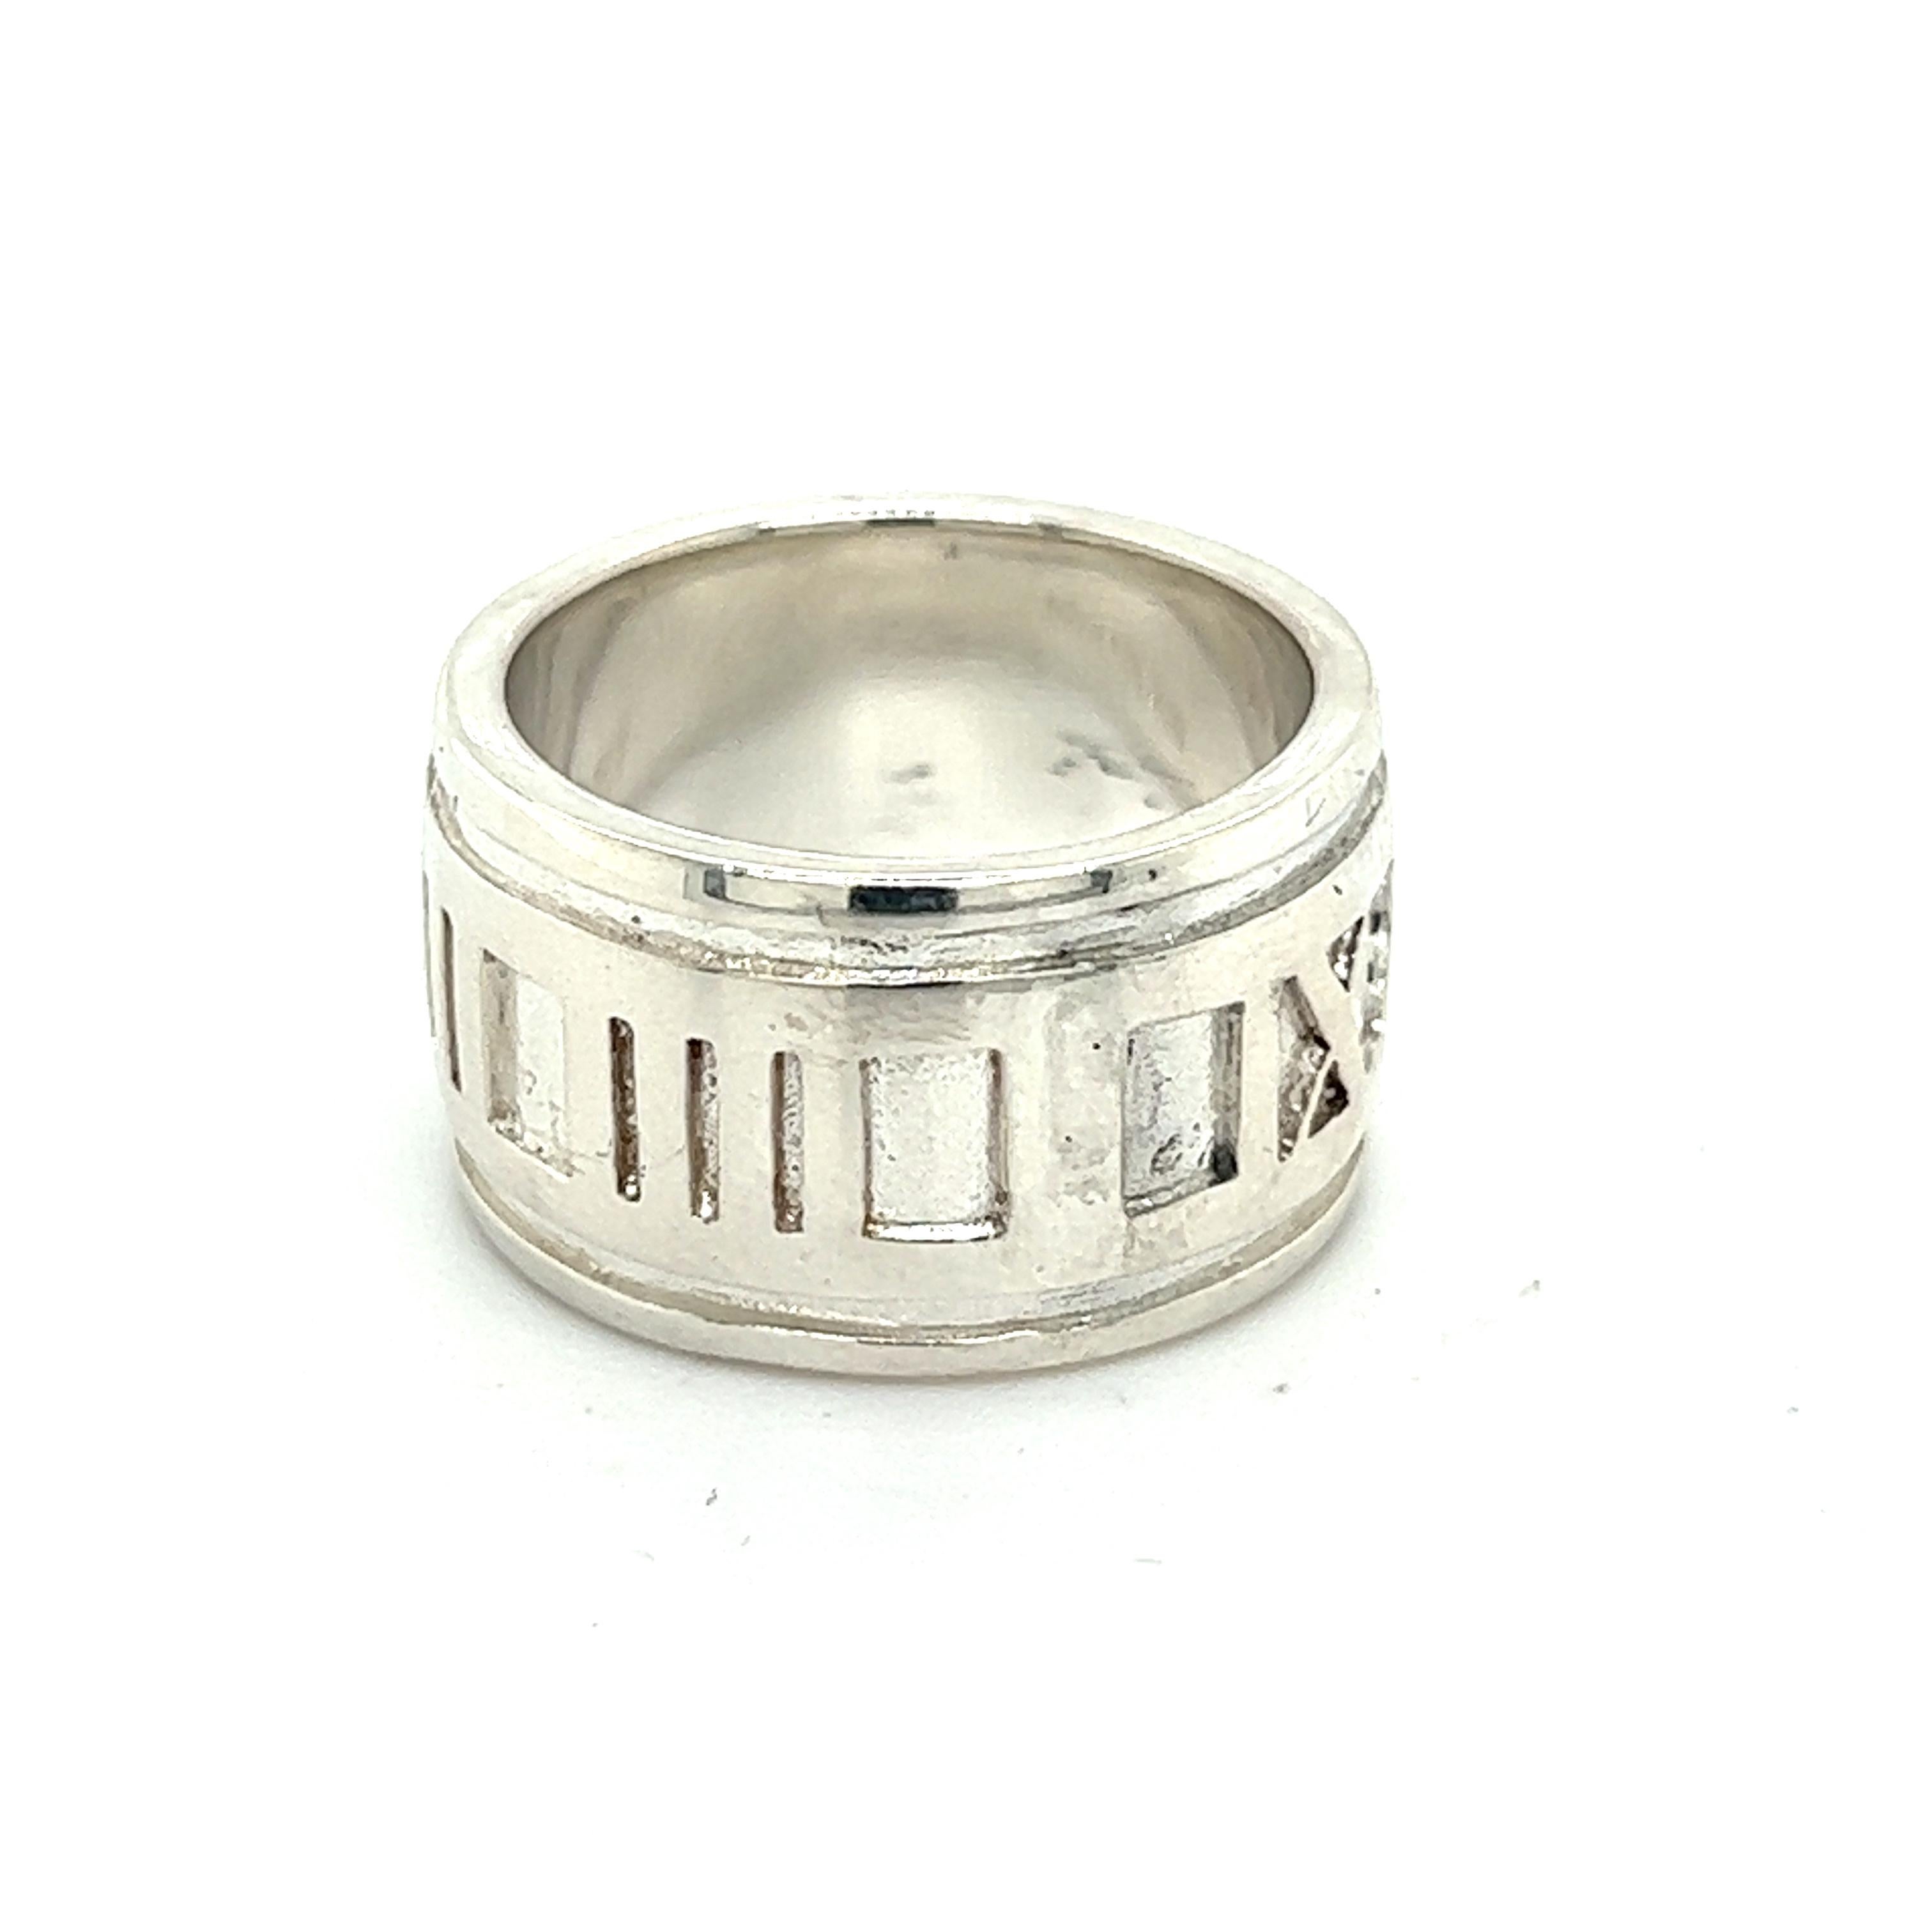 Authentic Tiffany & Co Estate Atlas Ring Size 5.25 Silver 11 mm TIF500

TRUSTED SELLER SINCE 2002

DETAILS
Ring Size: 5.25
Height: 11 mm
Weight: 7.4 Grams
Metal: Sterling Silver

We try to present our estate items as best as possible and most have